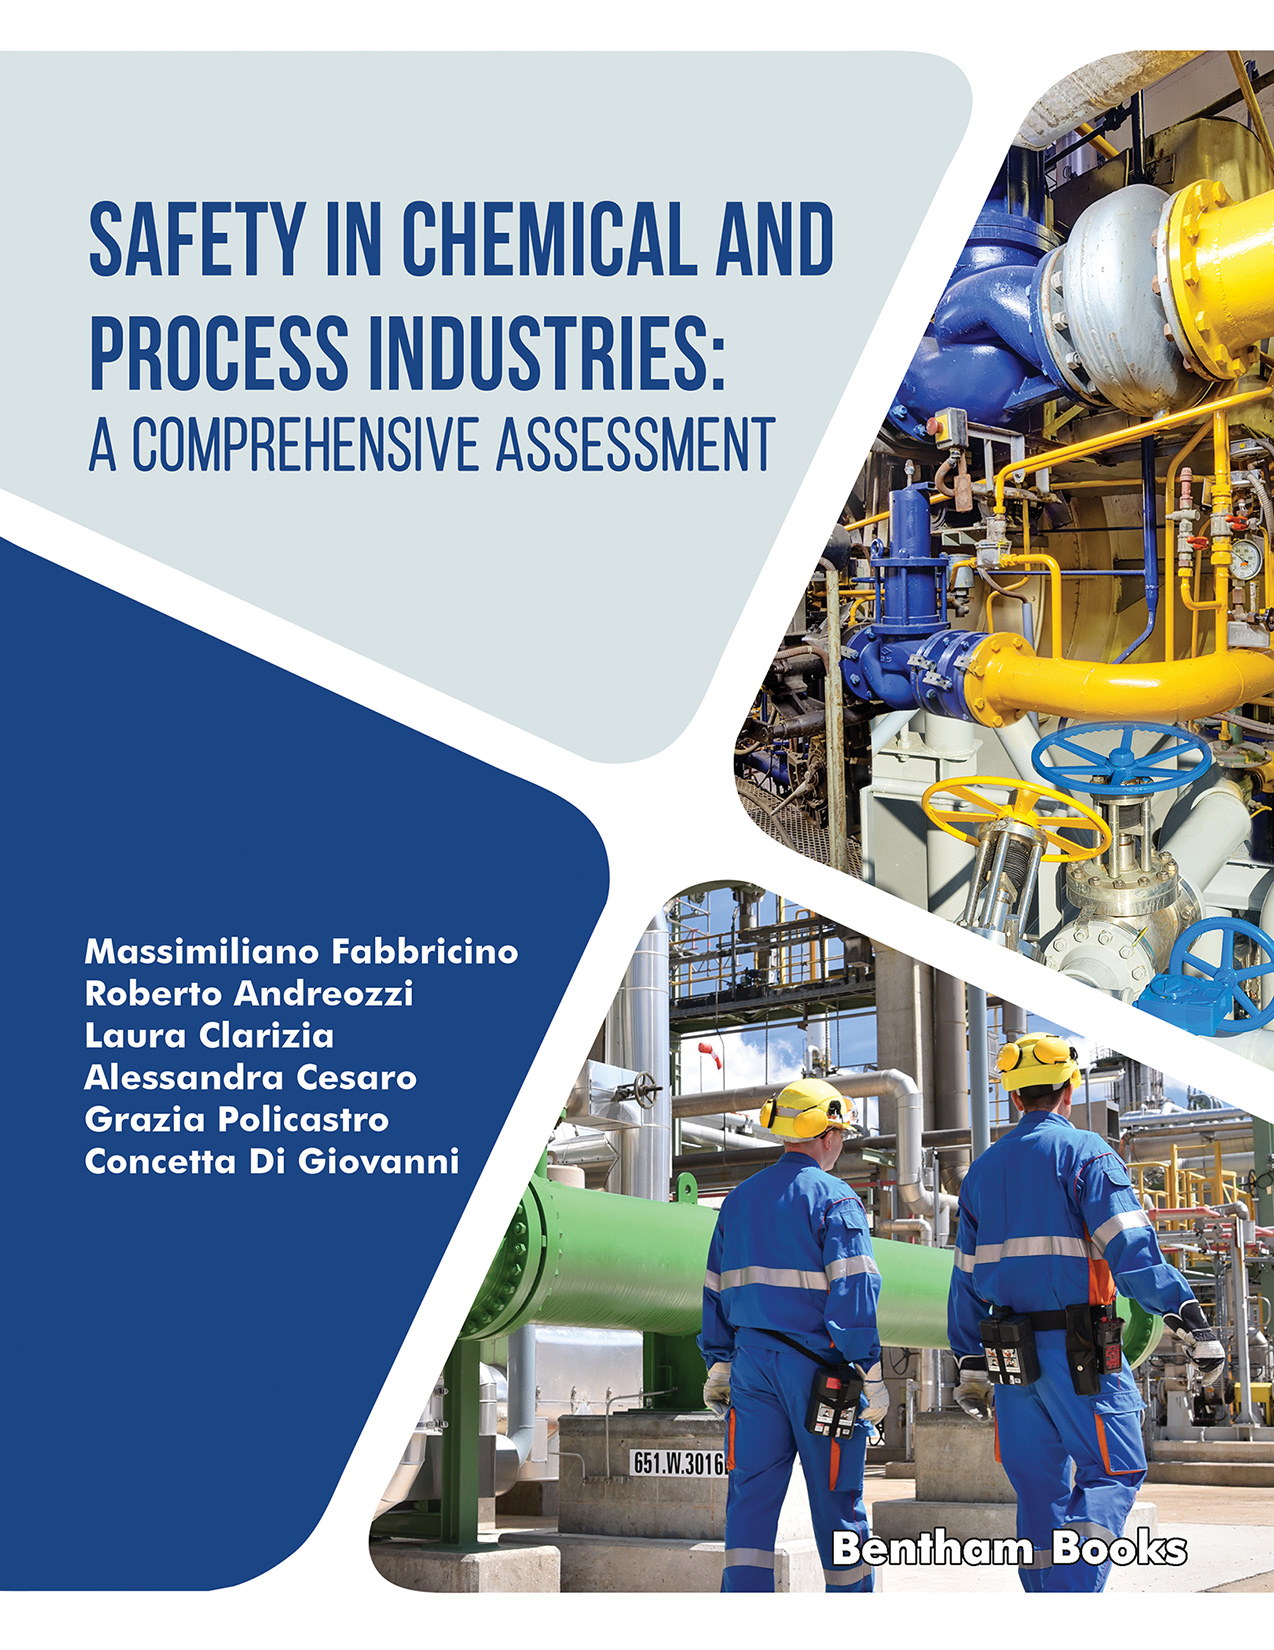 Safety in Chemical and Process Industries: A Comprehensive Assessment